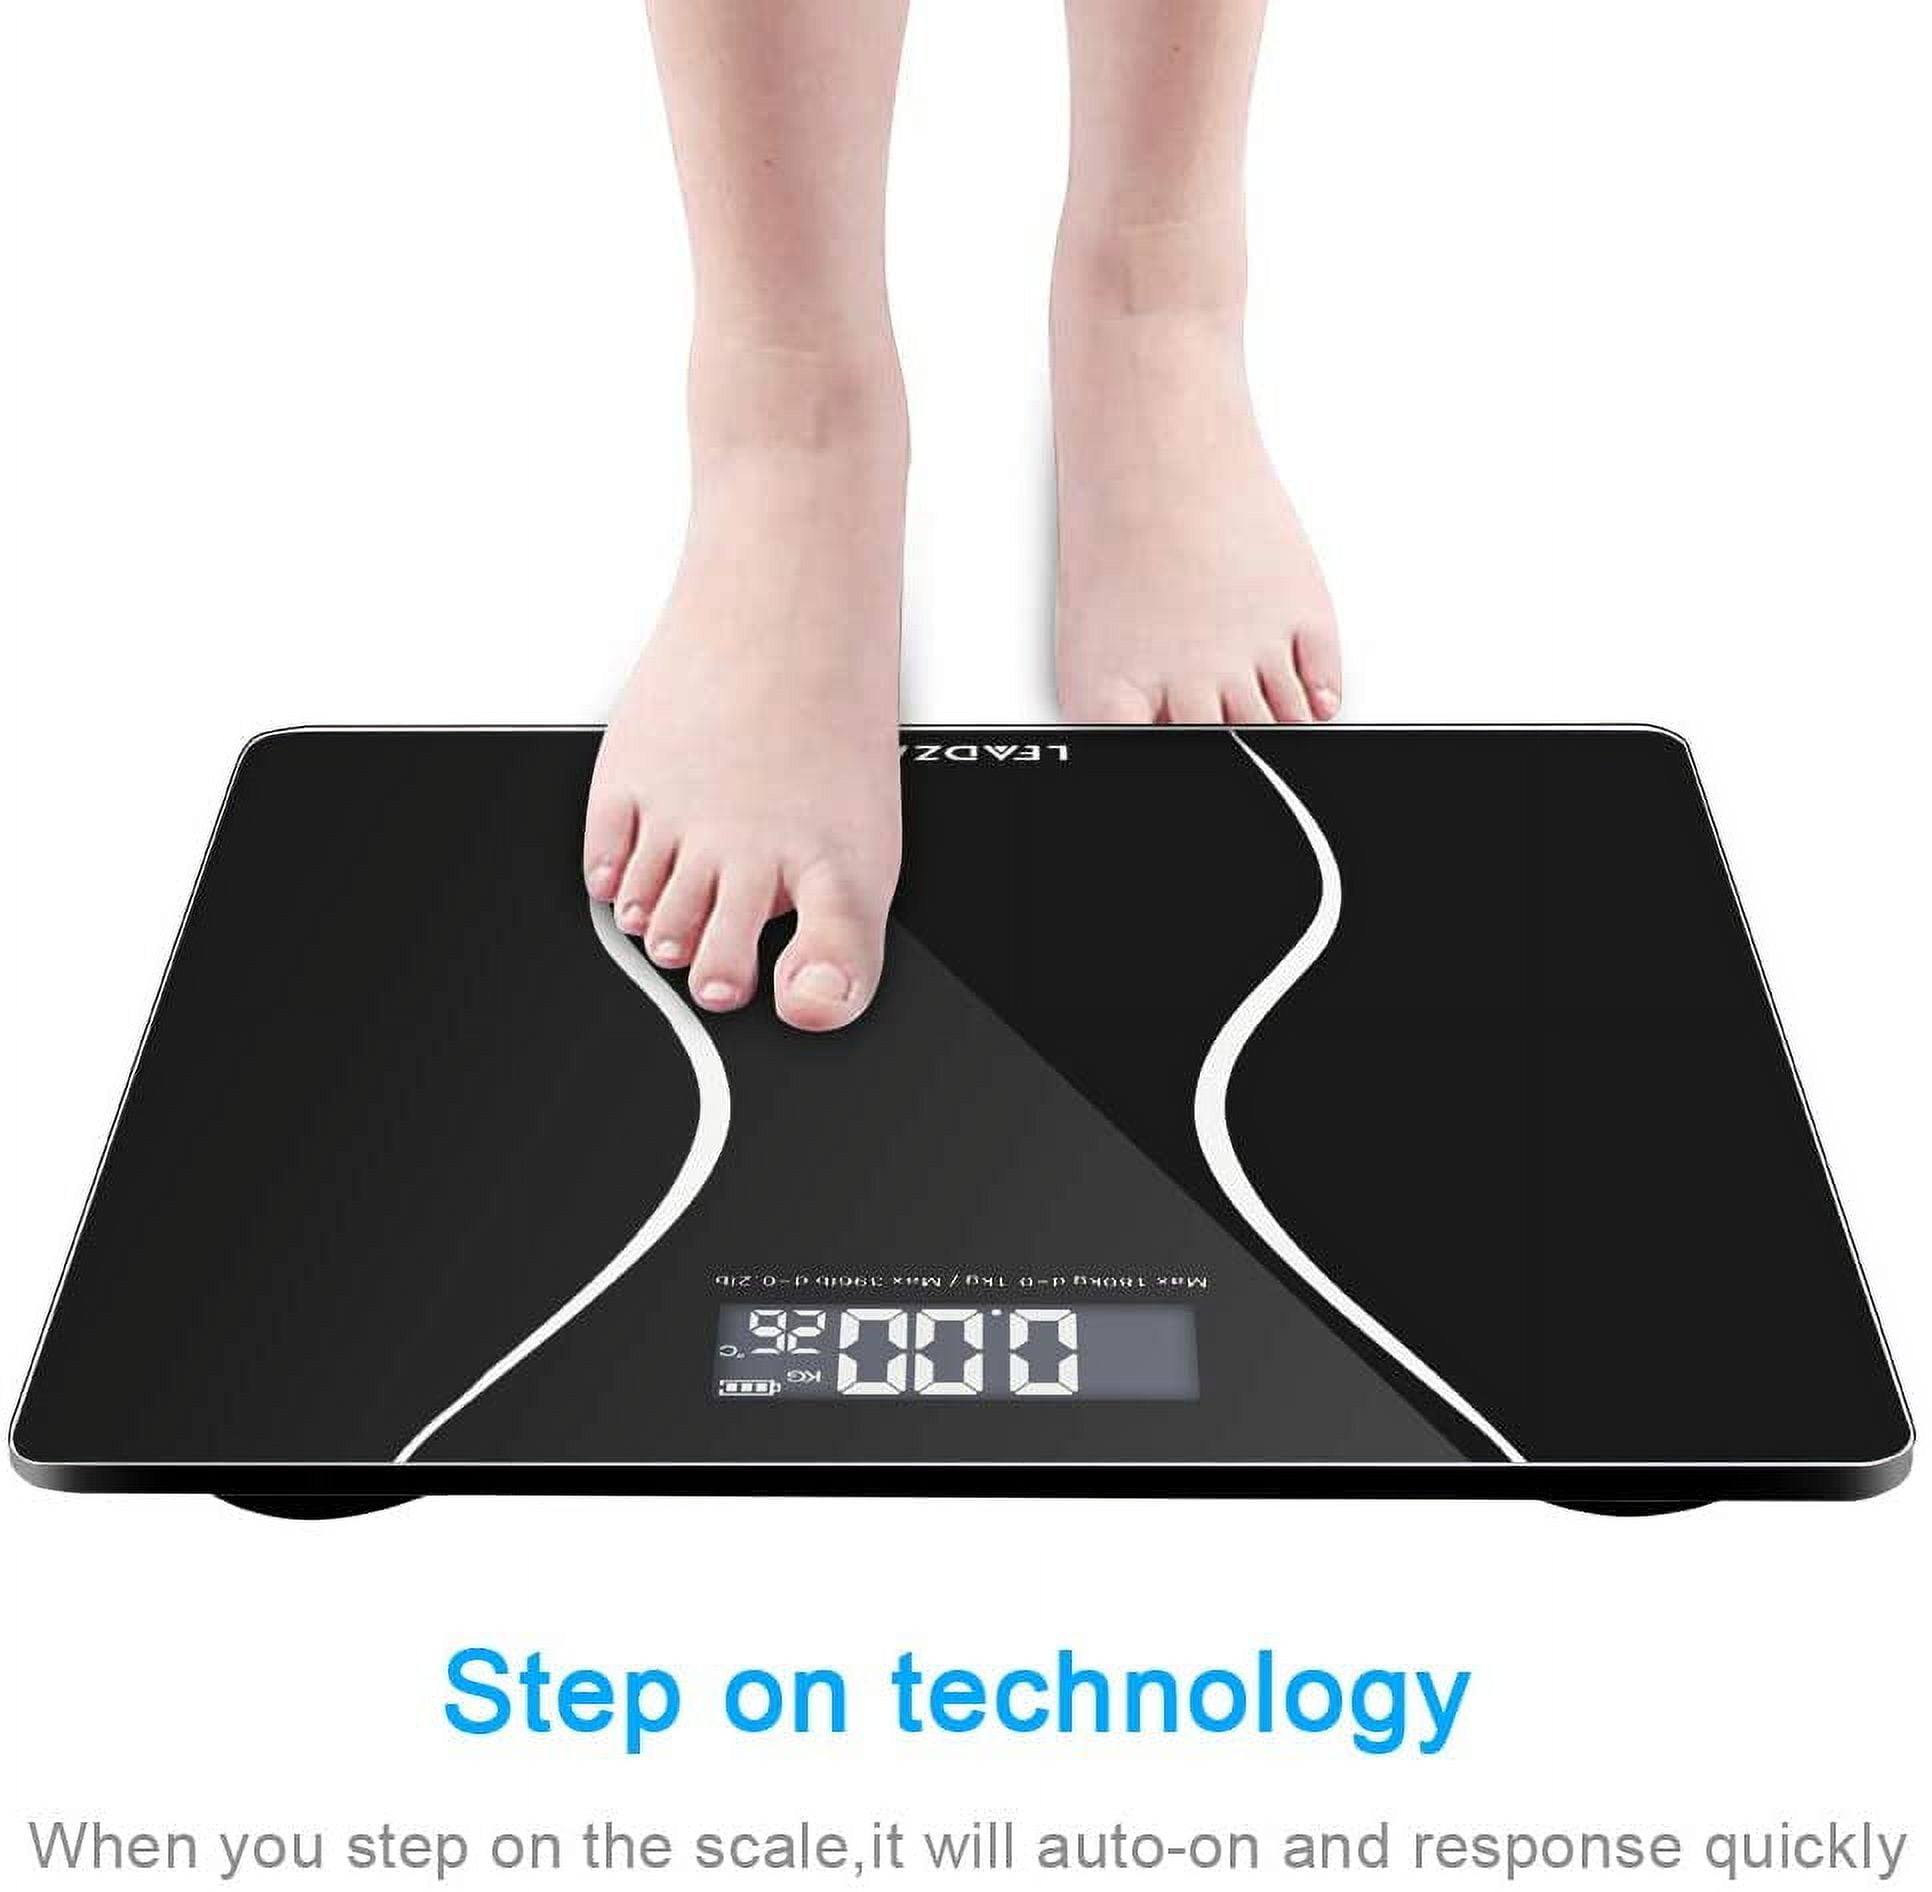 Weighing Scales With People by Ktsdesign